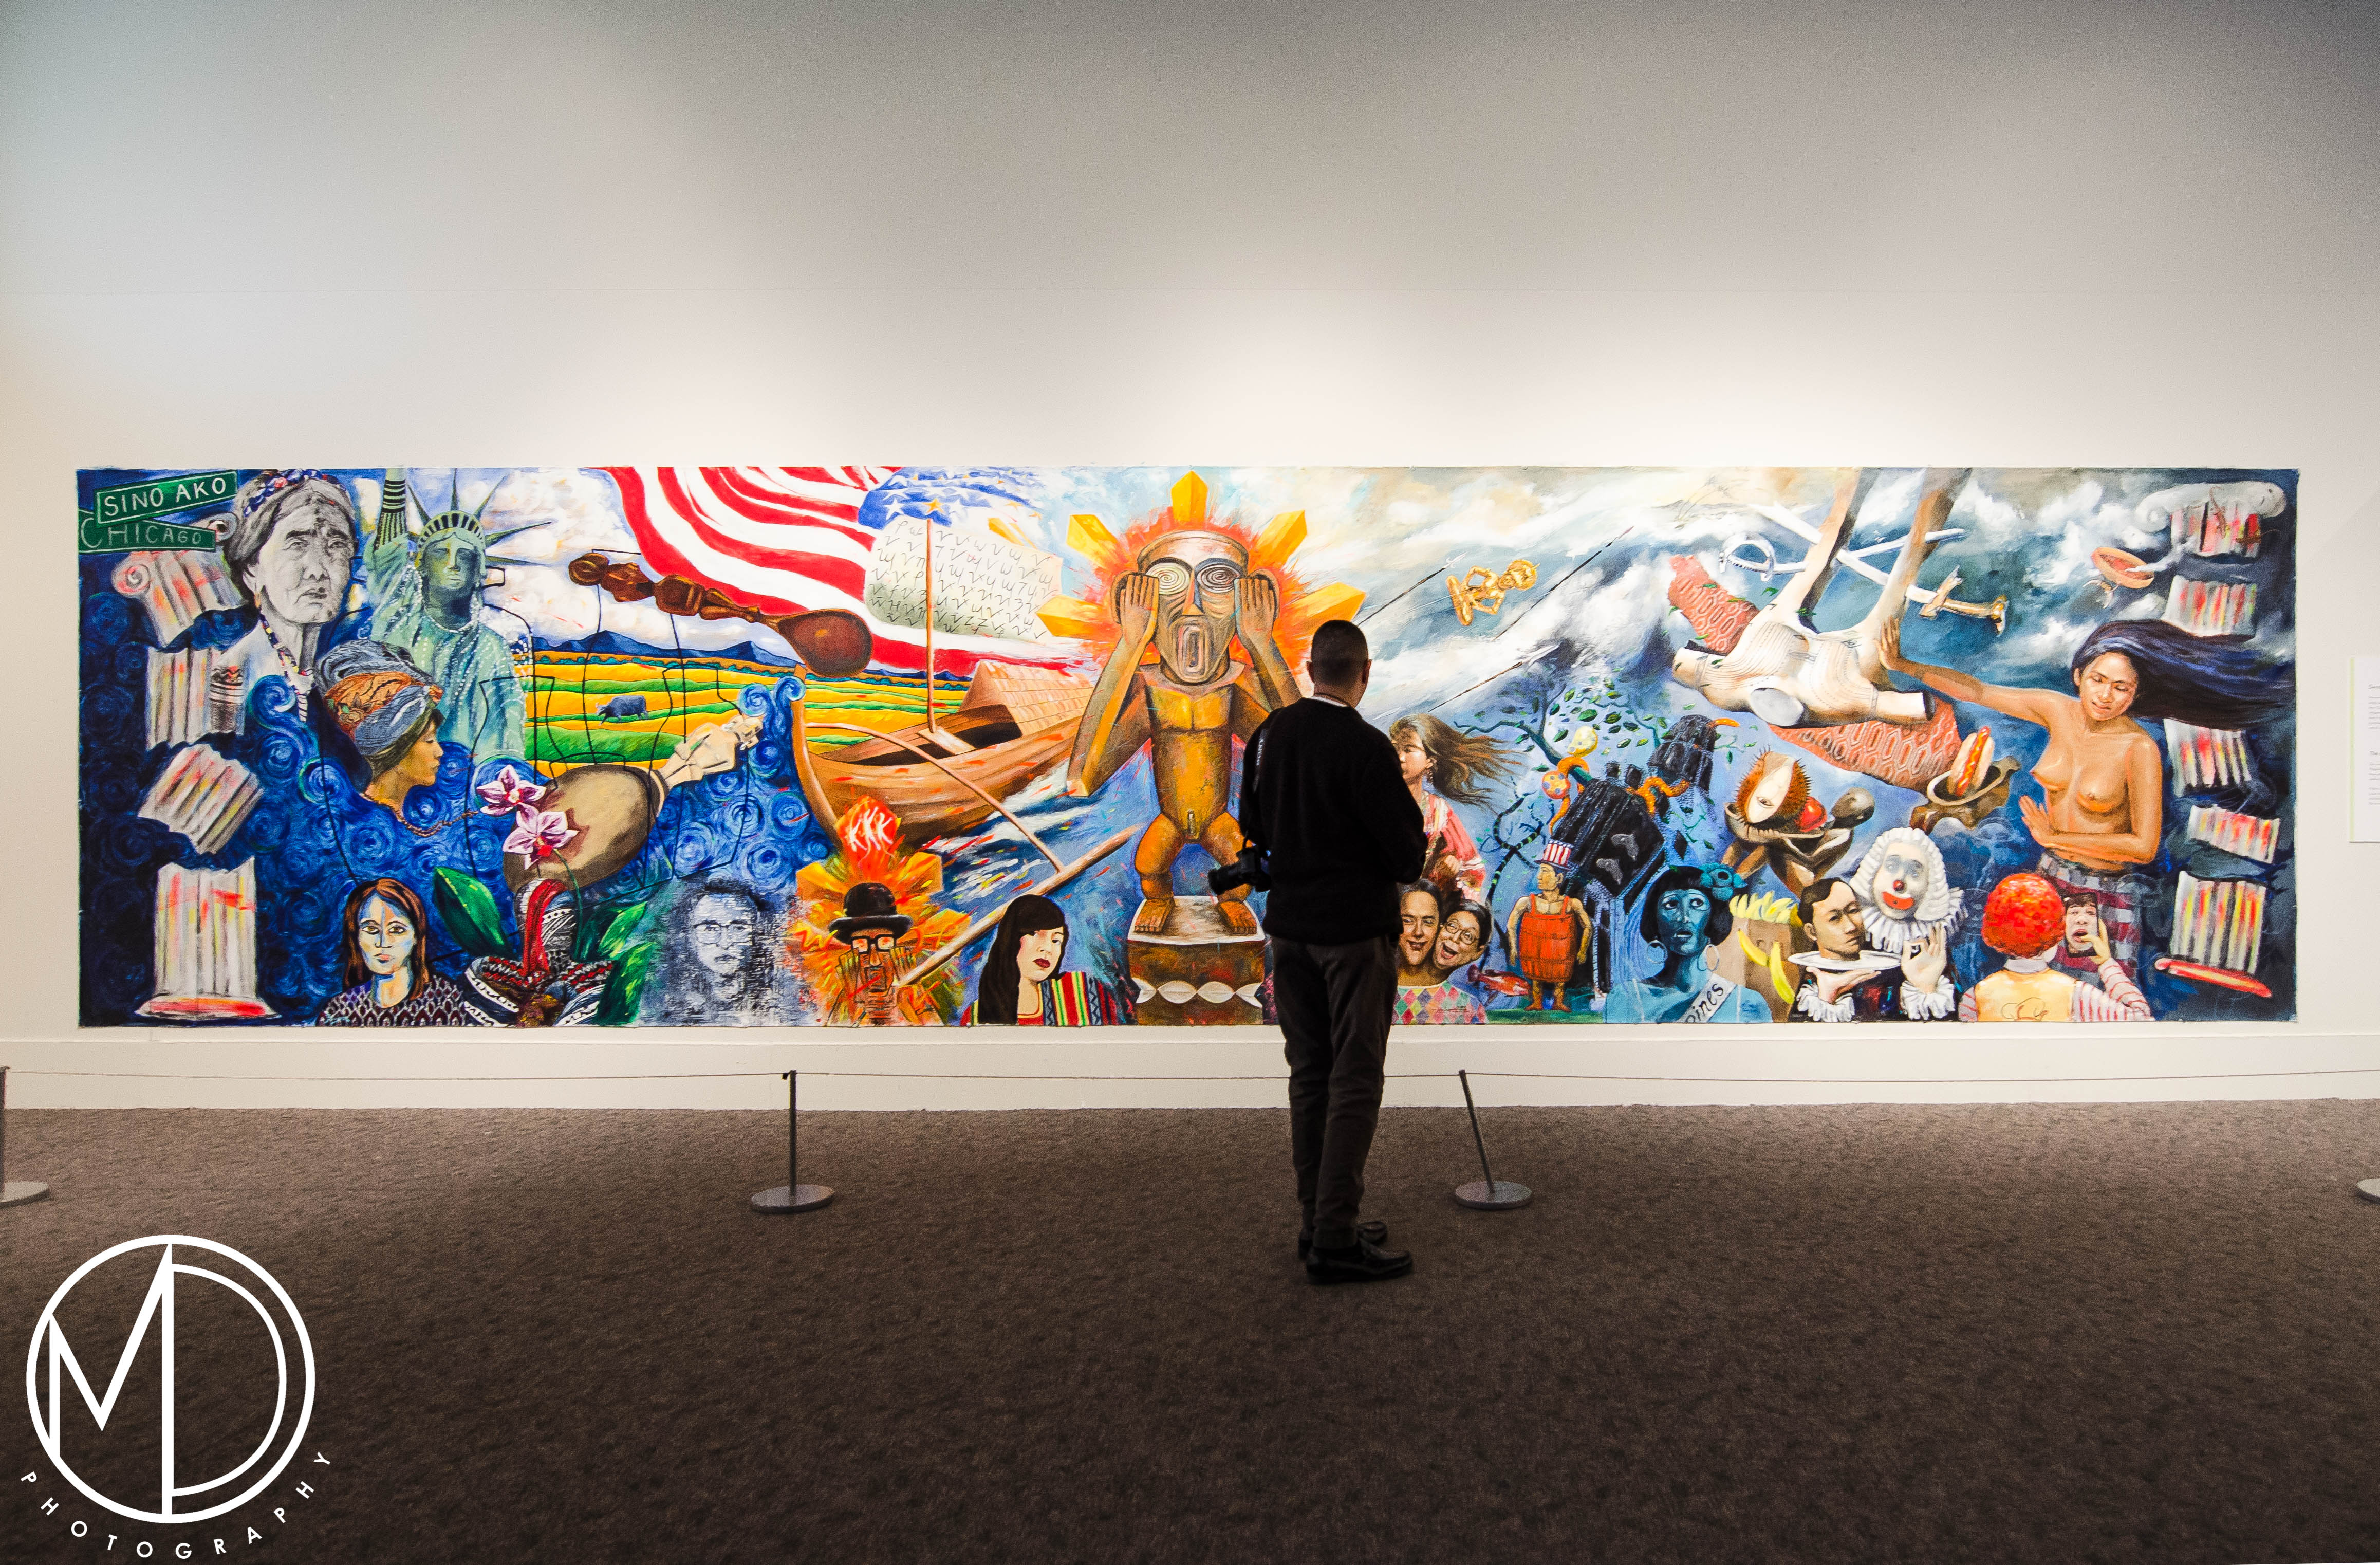 Guest looking at the Art and Anthropology Mural. (c) Field Museum of Natural History - CC BY-NC 4.0